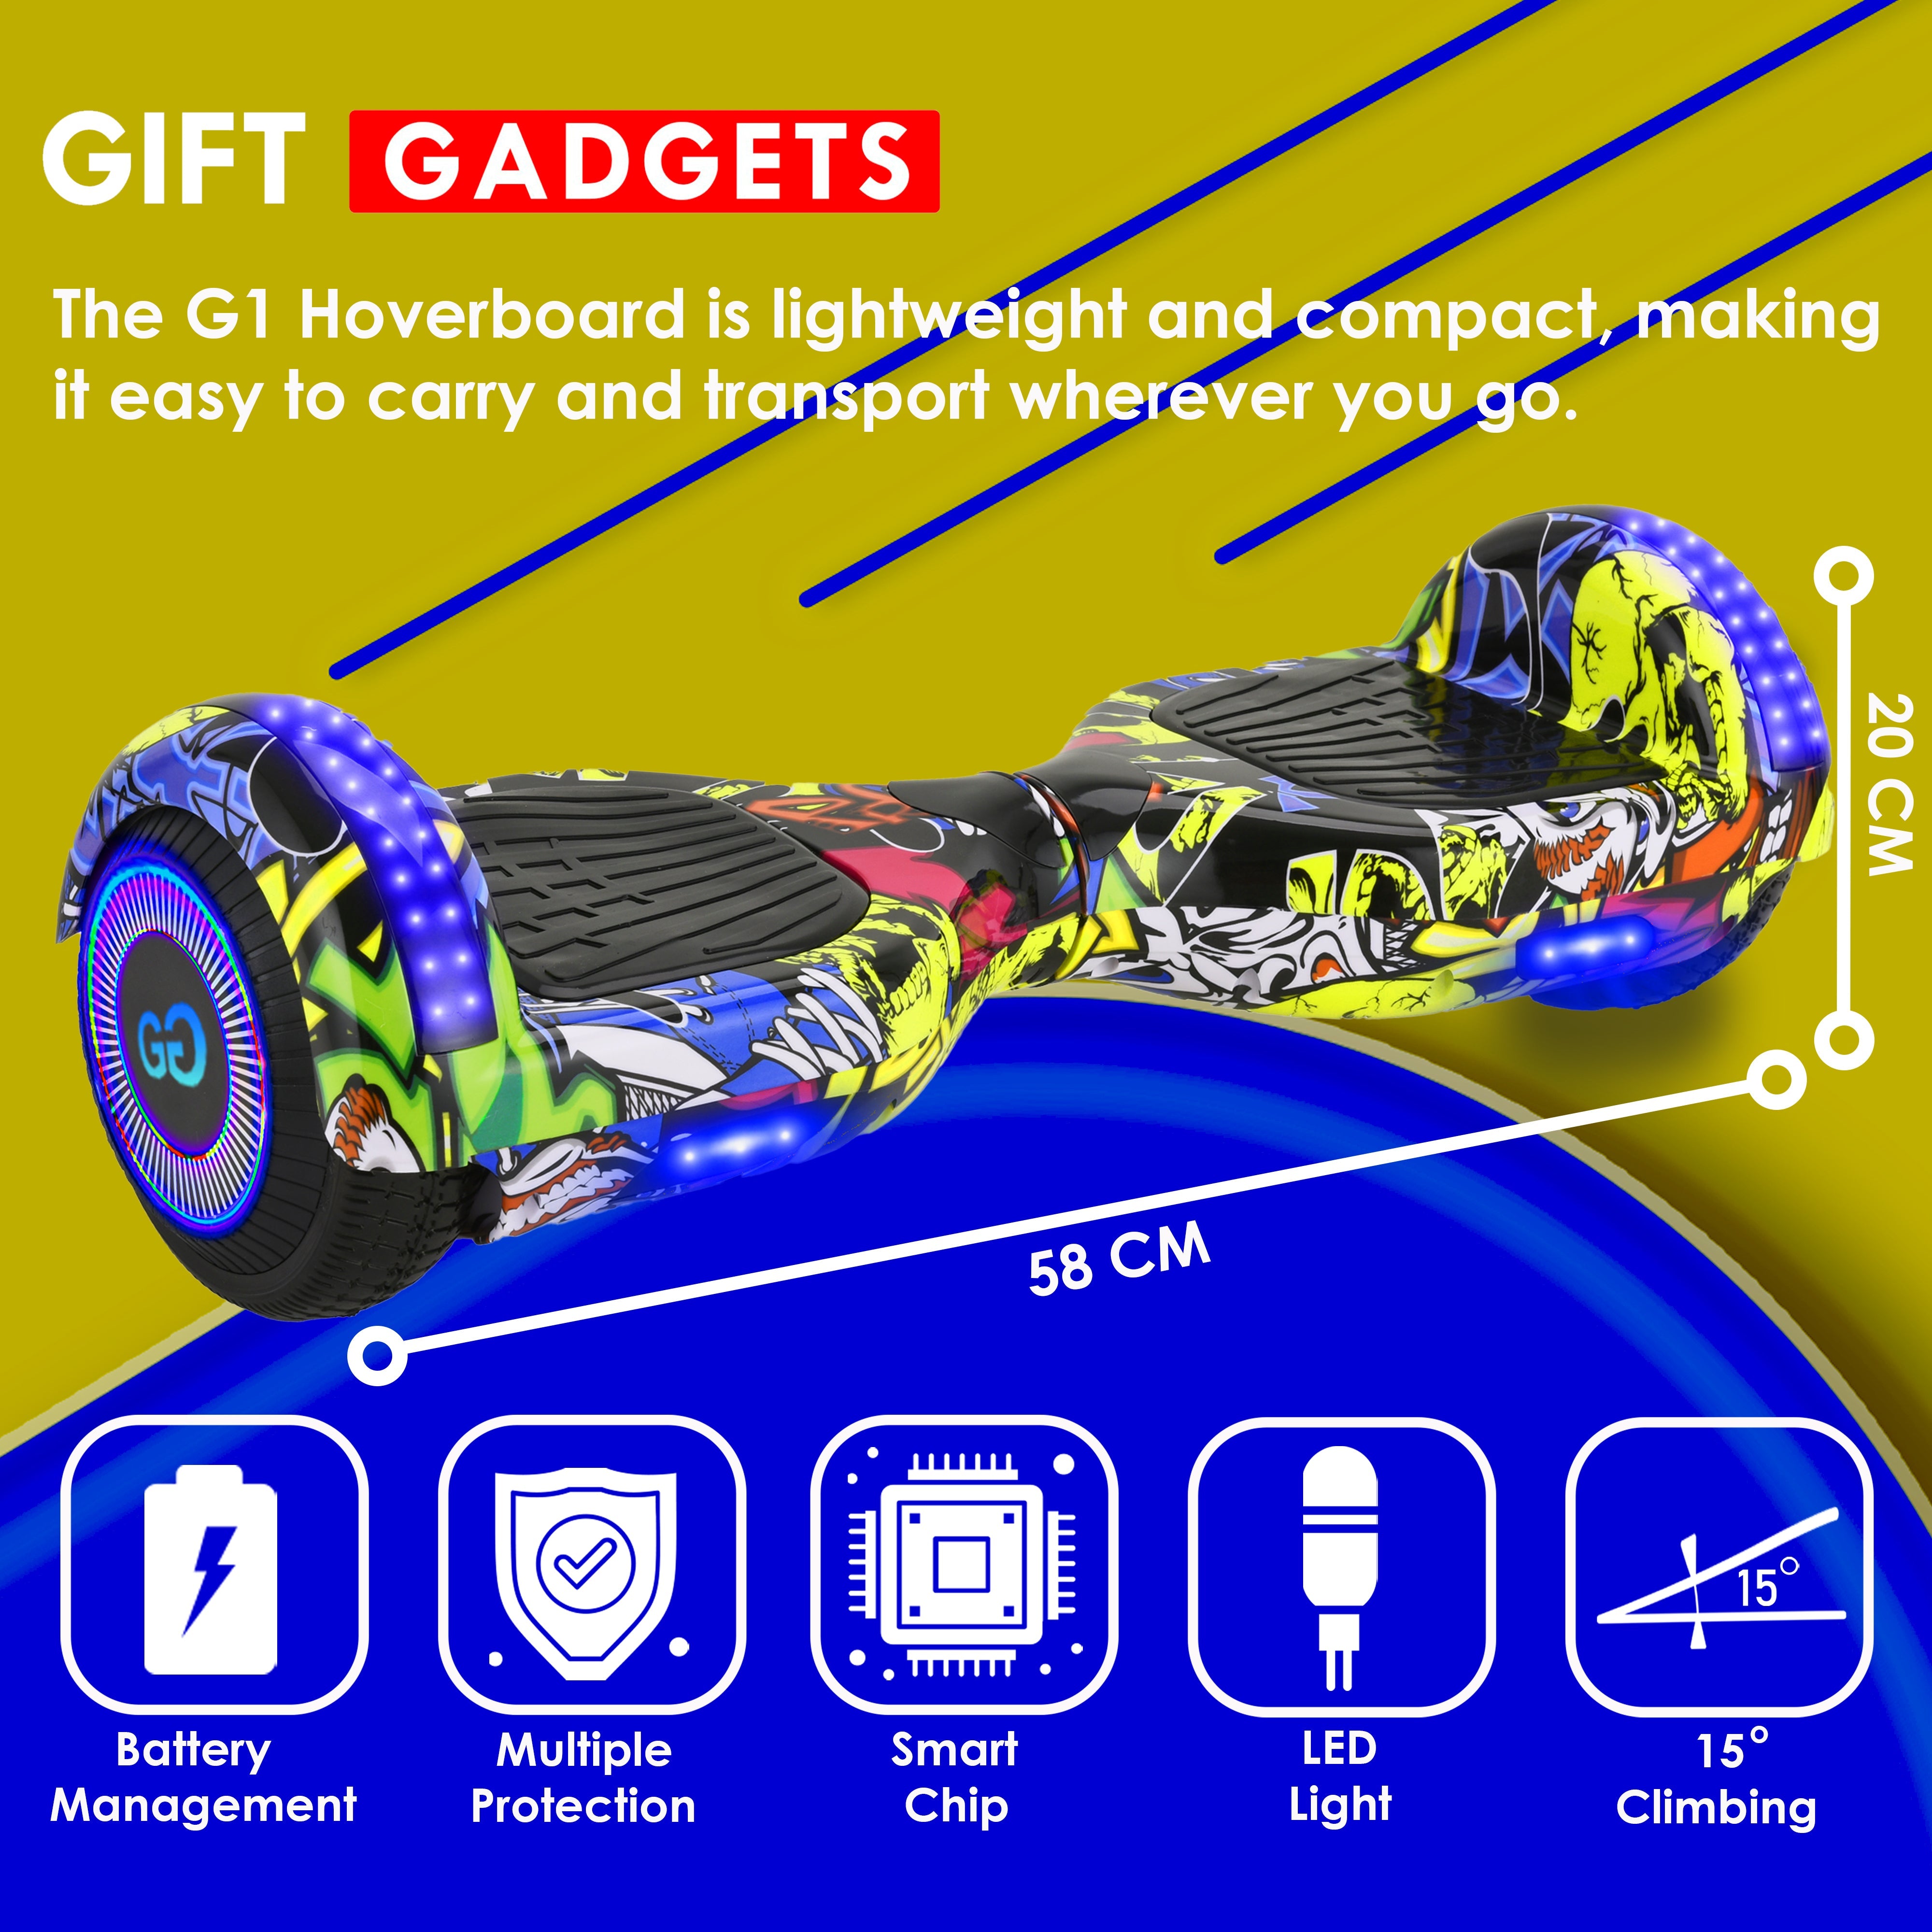 Hoverboard (G1) with LED lights, featuring battery management, multiple protection, and smart chip technologies, highlighted dimensions.